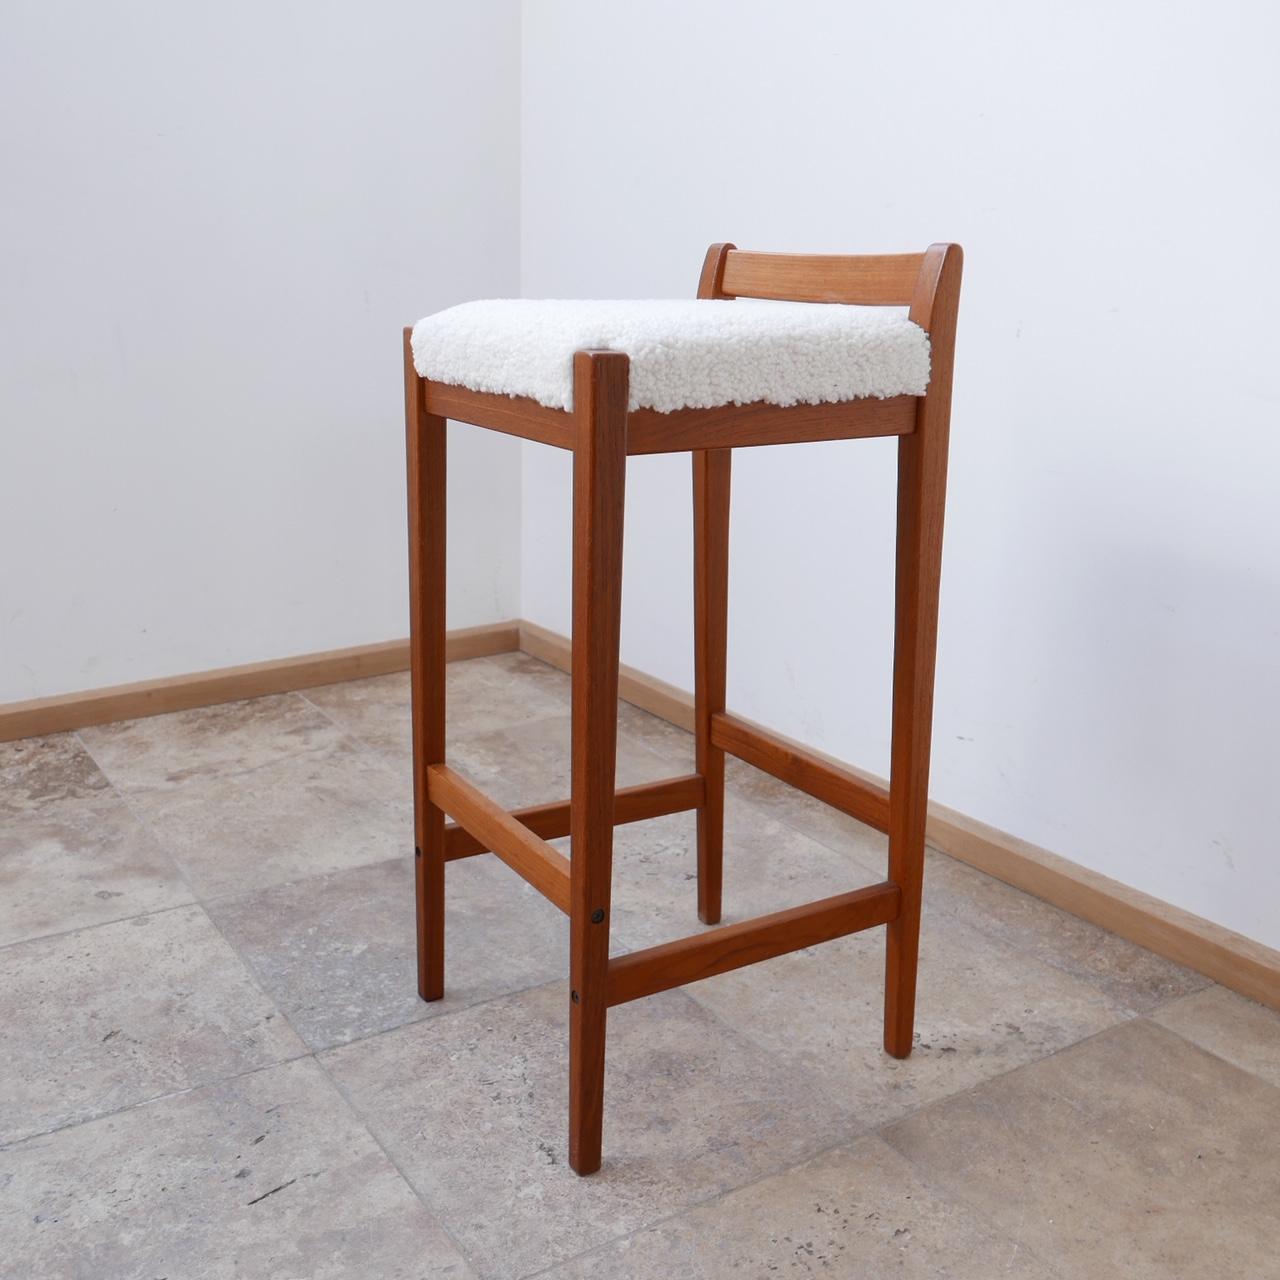 A stylish single bar stool. 

Sweden, c1960s. 

Re-upholstered. 

Immaculate condition 

Location: London Gallery. 

Dimensions: 39 W x 39 D x 74 Seat Height x 80.5 Total Height in cm.

Delivery: POA

We can ship around the world. Can